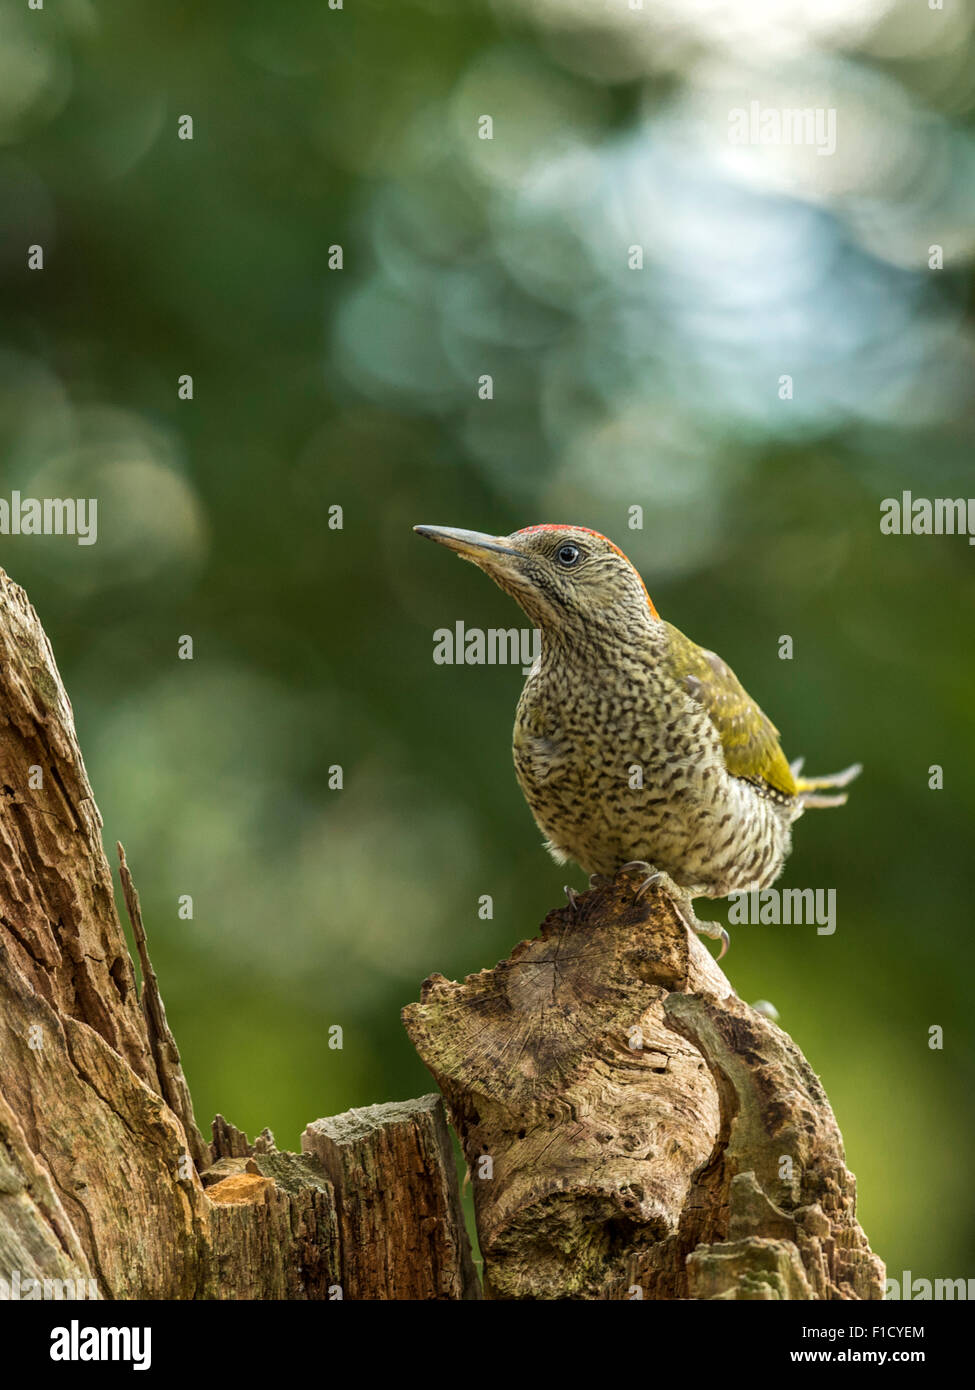 Juvenile European Green Woodpecker (Picus viridis) foraging in natural woodland countryside setting. Beautiful, unique footage. Stock Photo